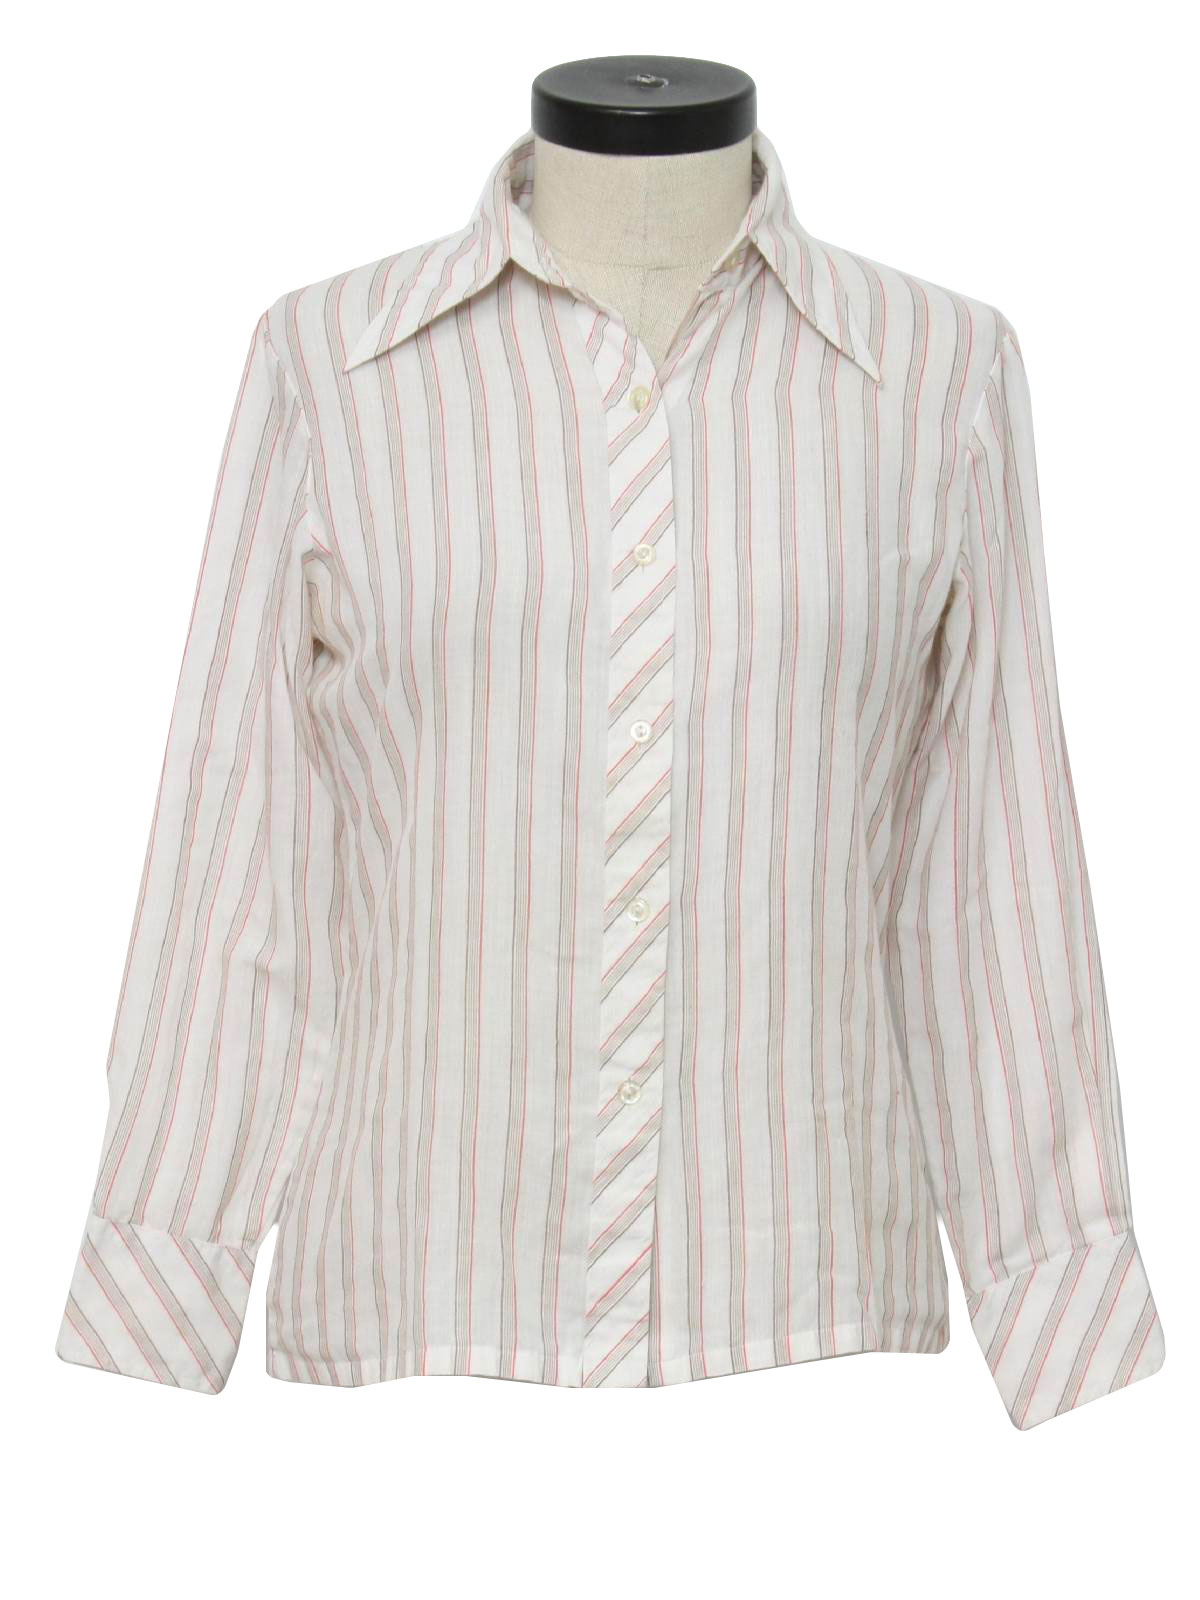 70s Shirt (Missing Label): 70s -Missing Label- Womens white, red and ...